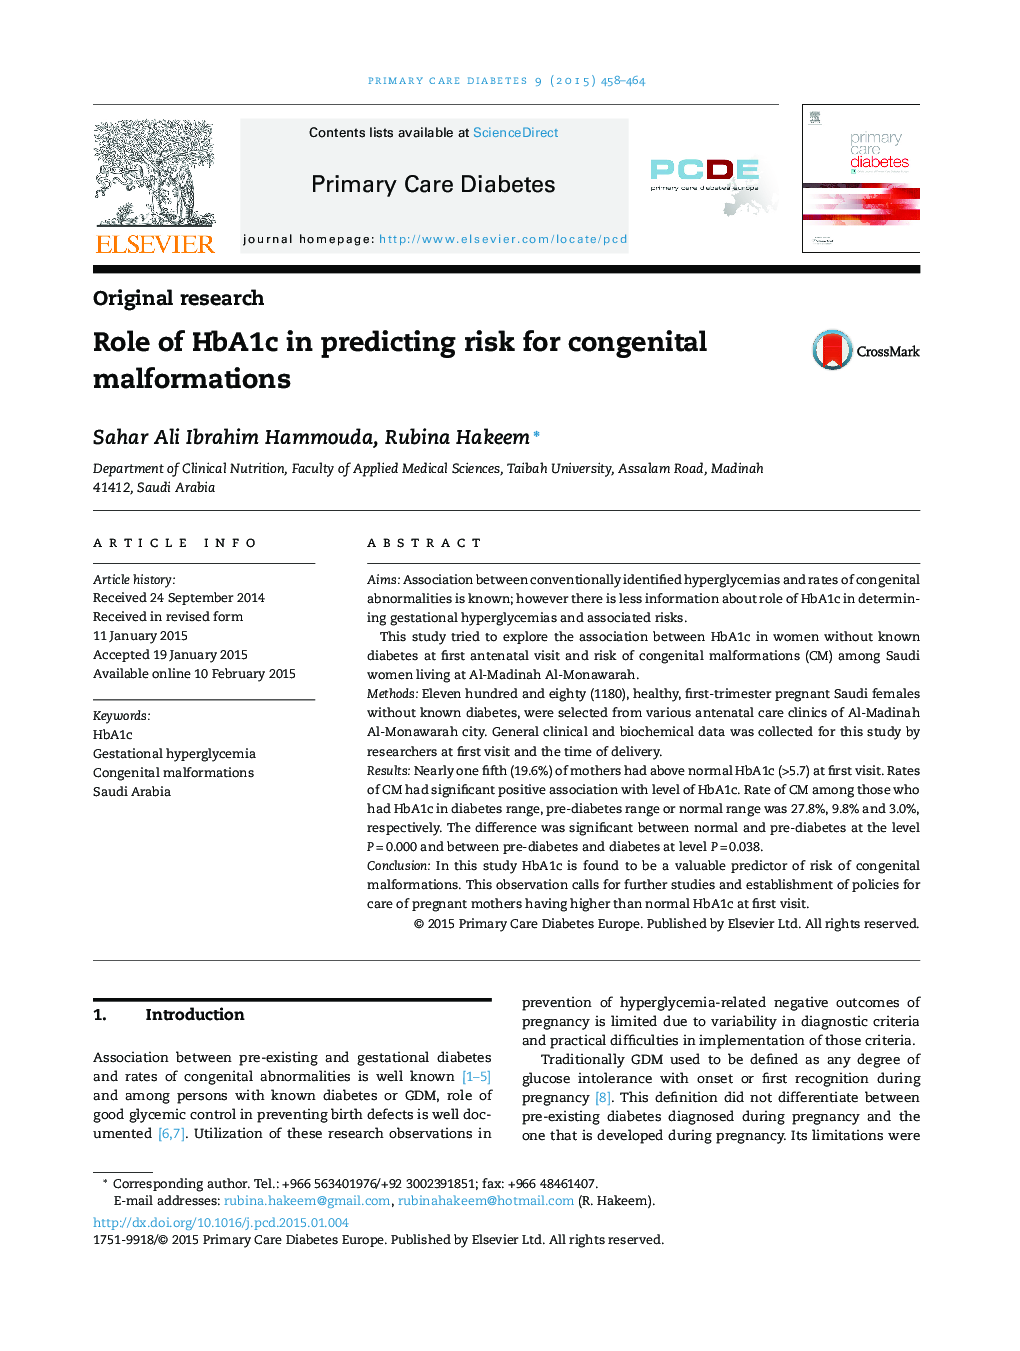 Role of HbA1c in predicting risk for congenital malformations